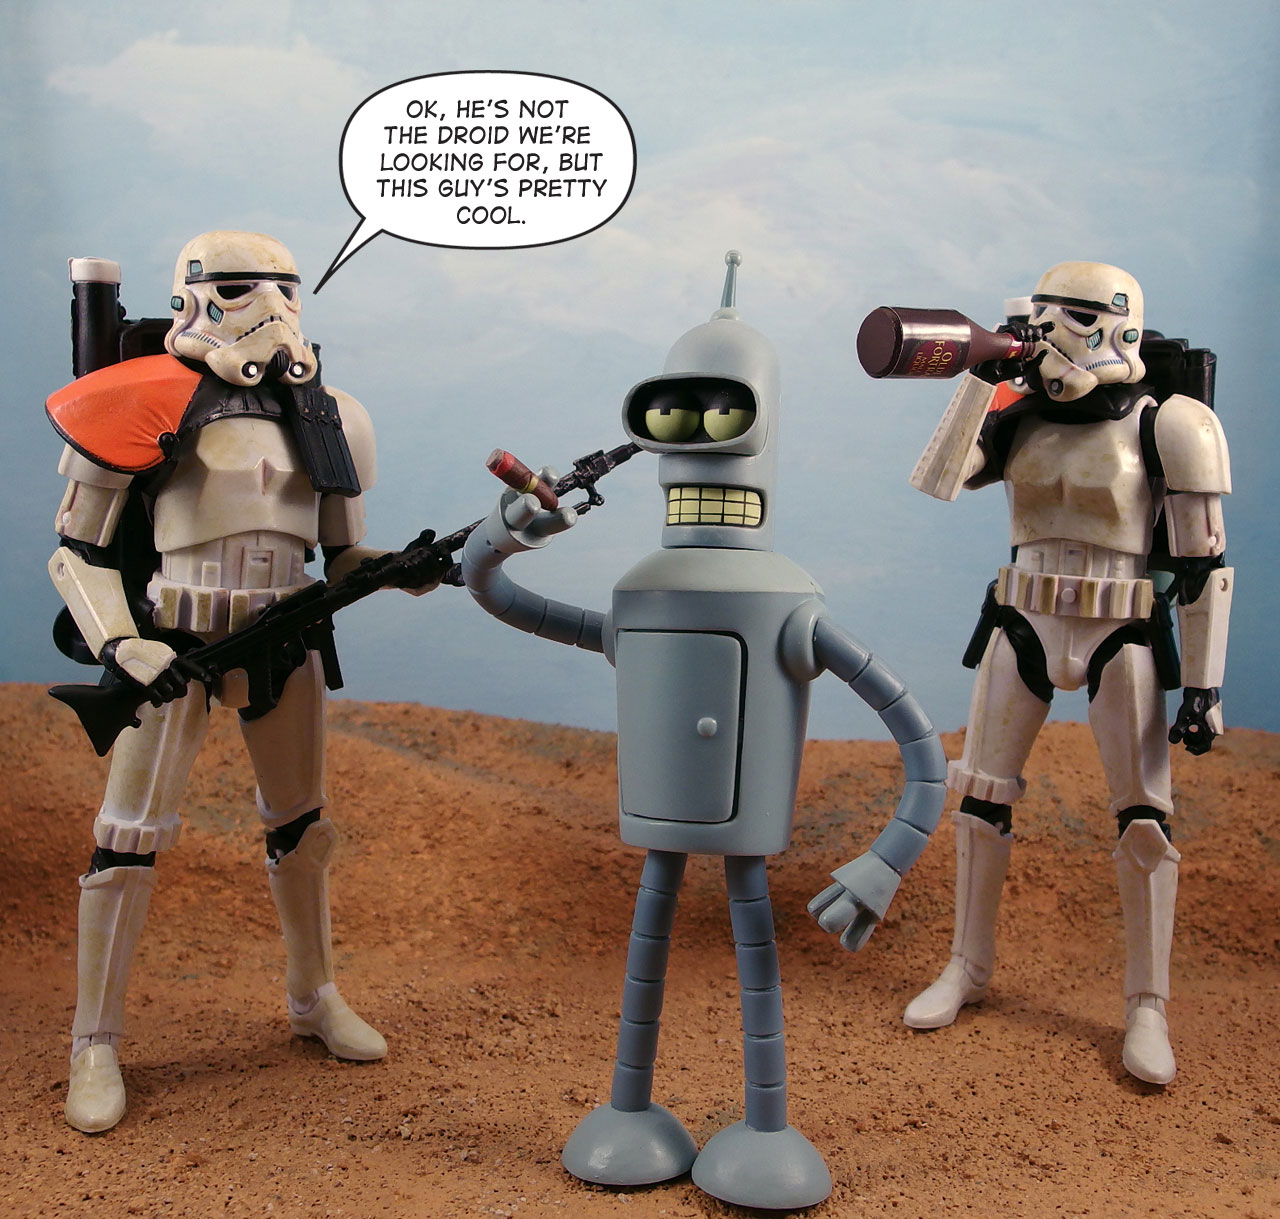 OK, he's not the droid we're looking for, but this guy's pretty cool.